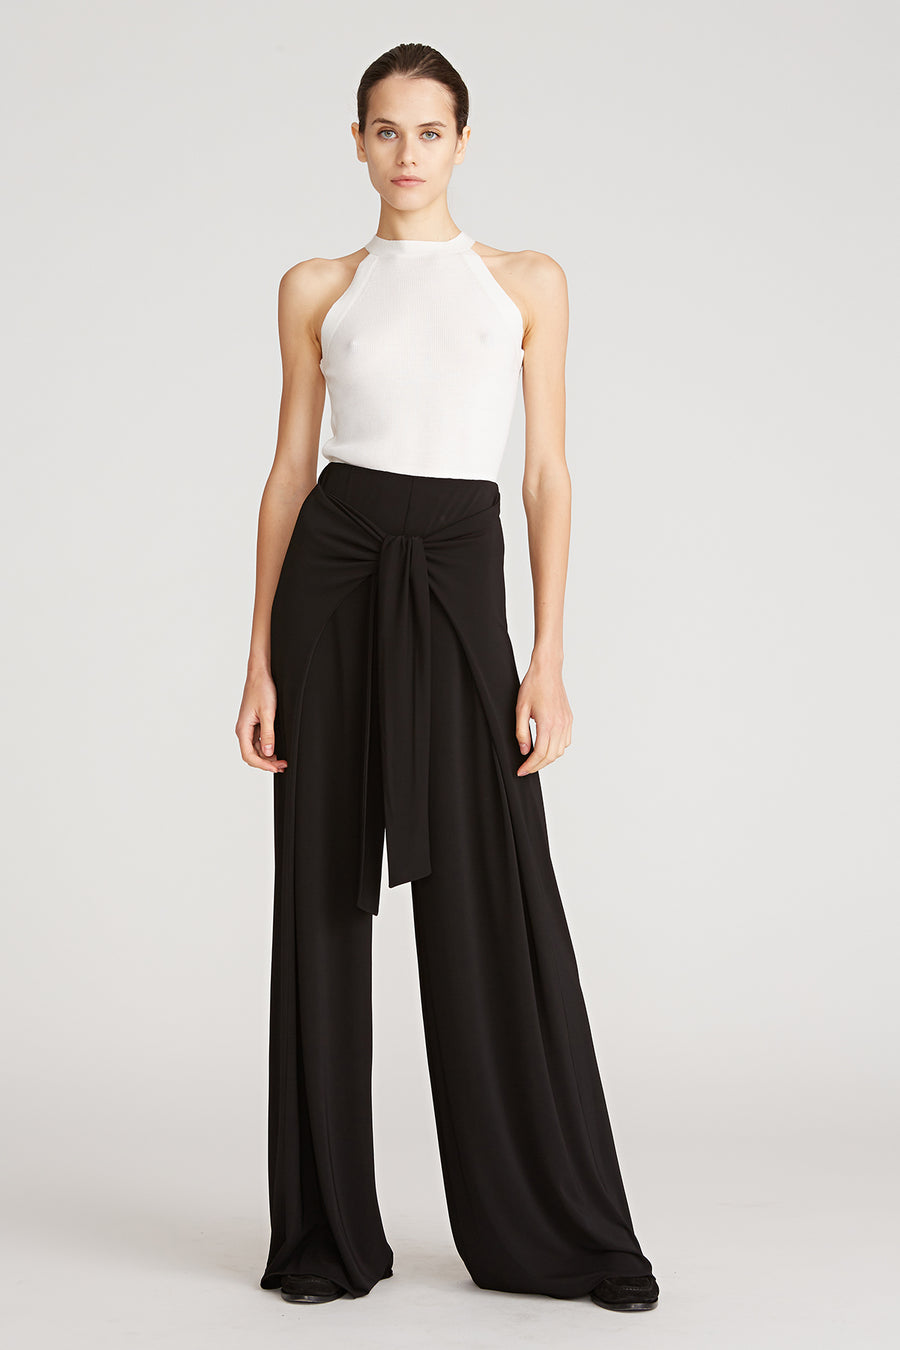 Ambrose Jersey Tie Front Pant